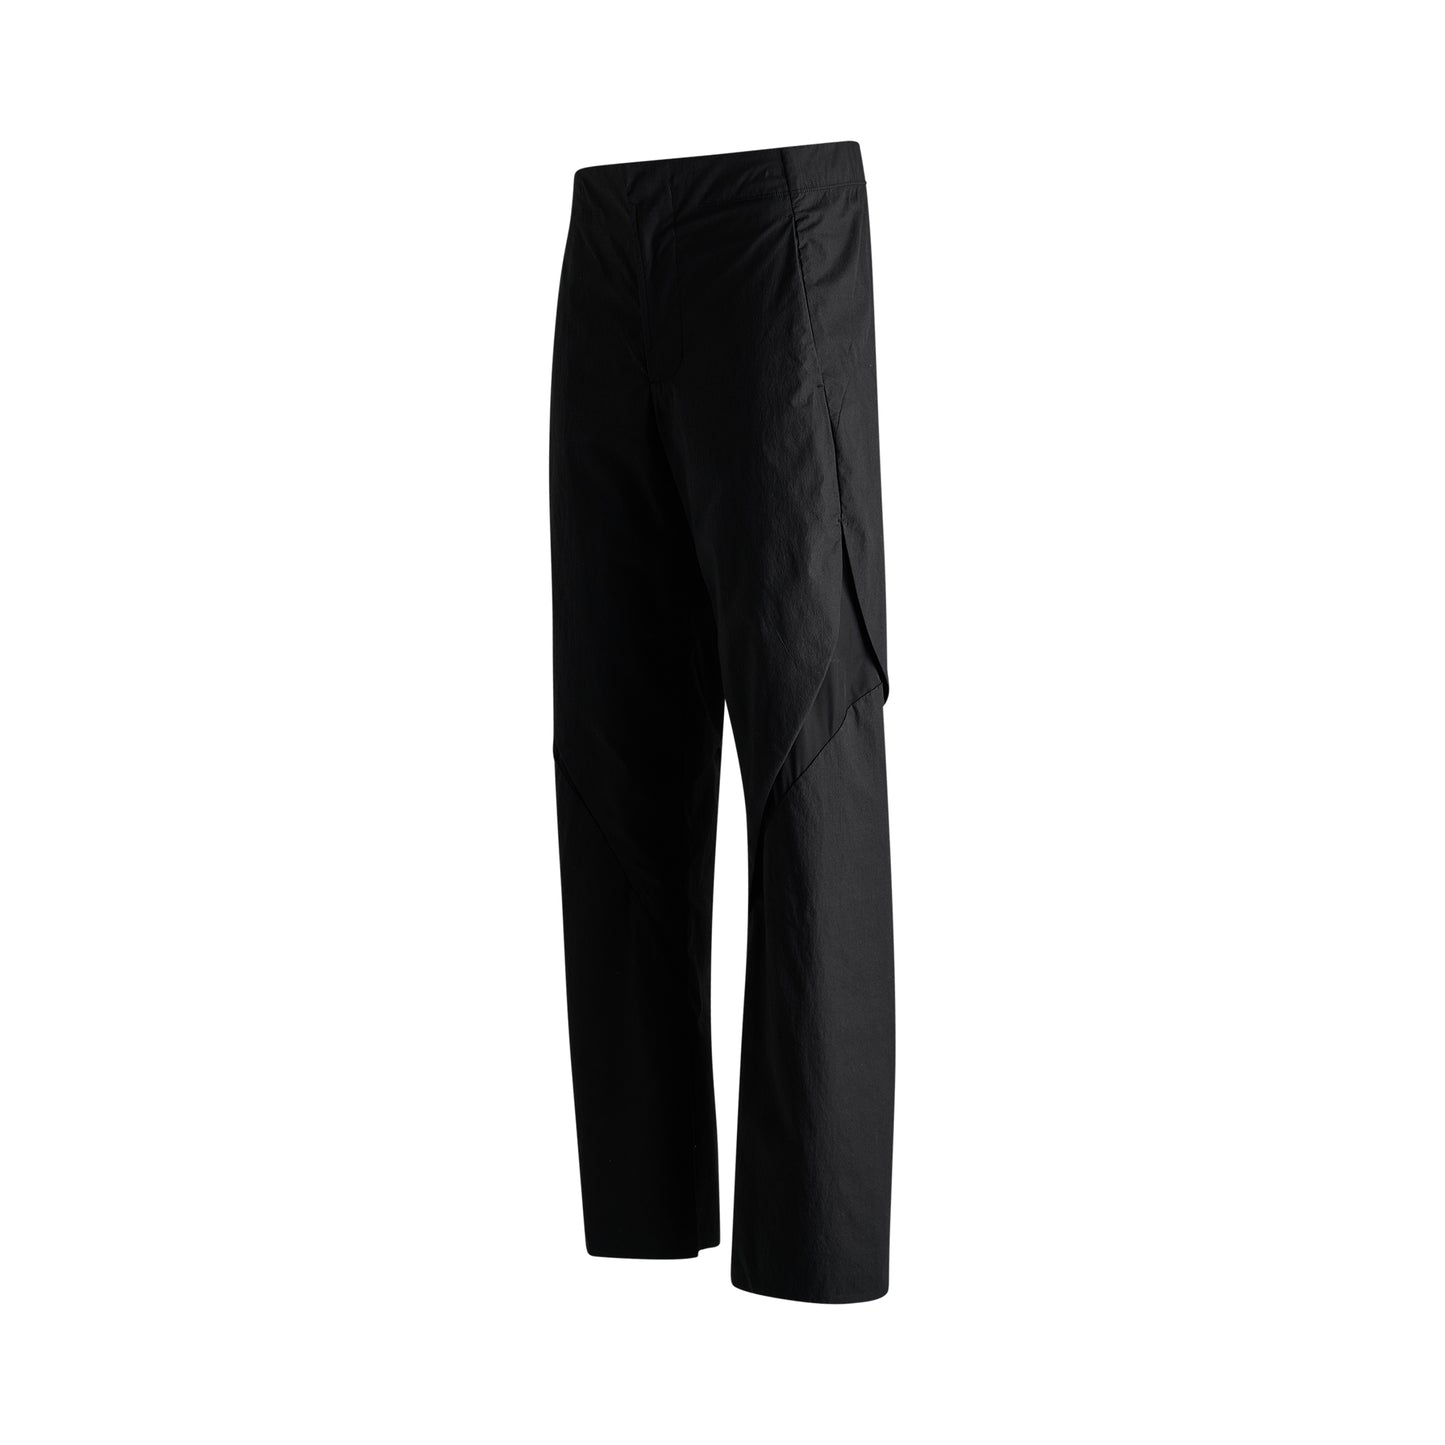 6.0 Technical Pants (Center) in Black